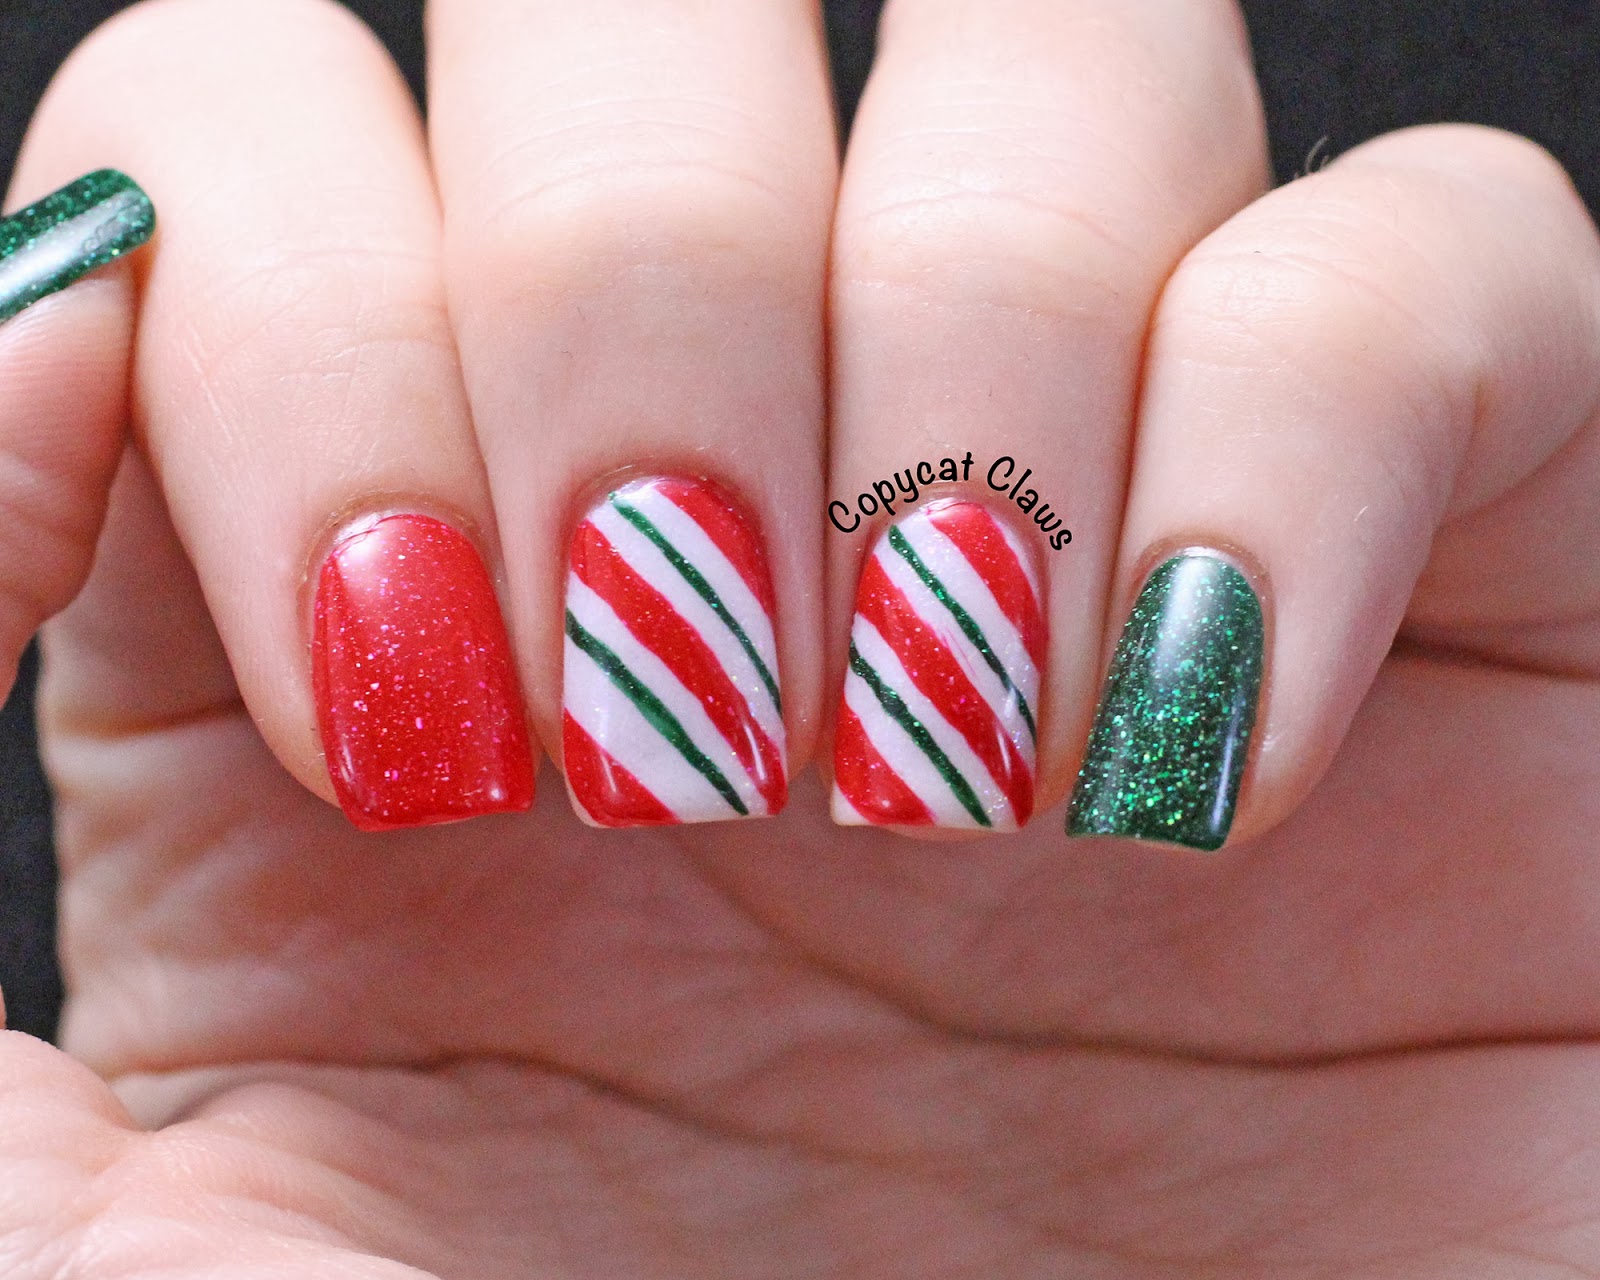 1. Candy Cane Nail Art Ideas on Pinterest - wide 3